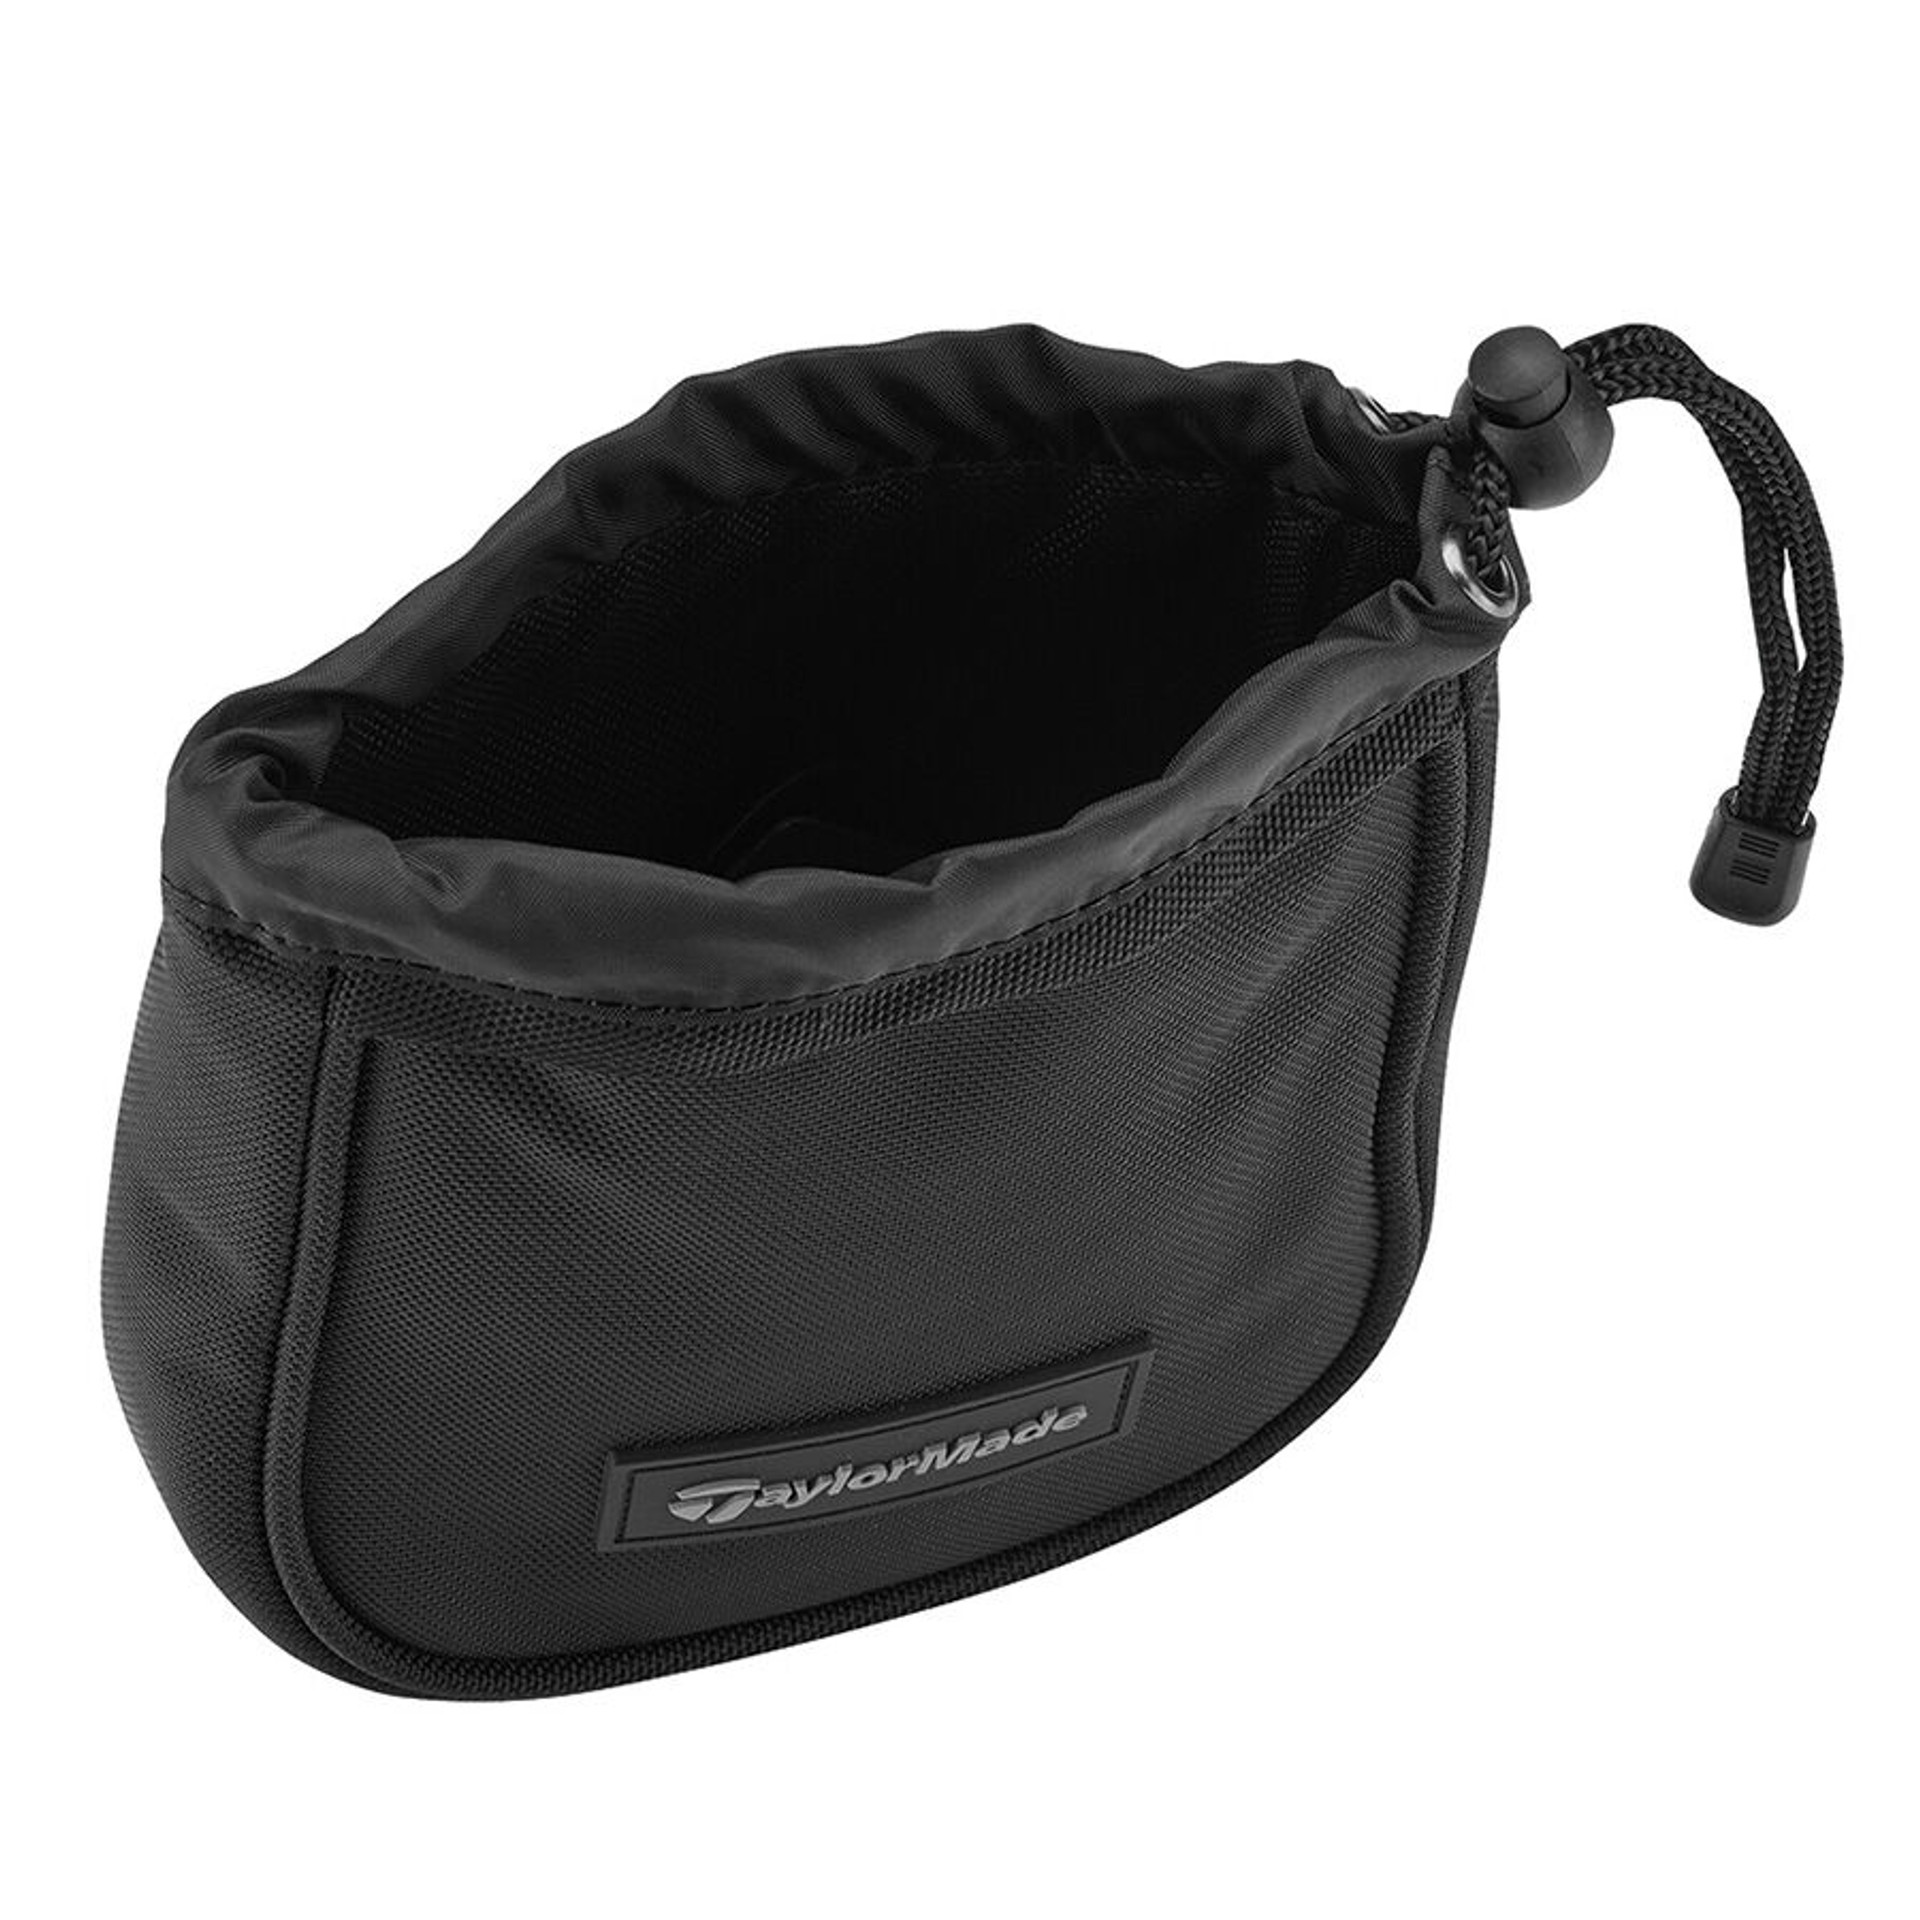 TaylorMade Golf Players Valuables Pouch | RockBottomGolf.com